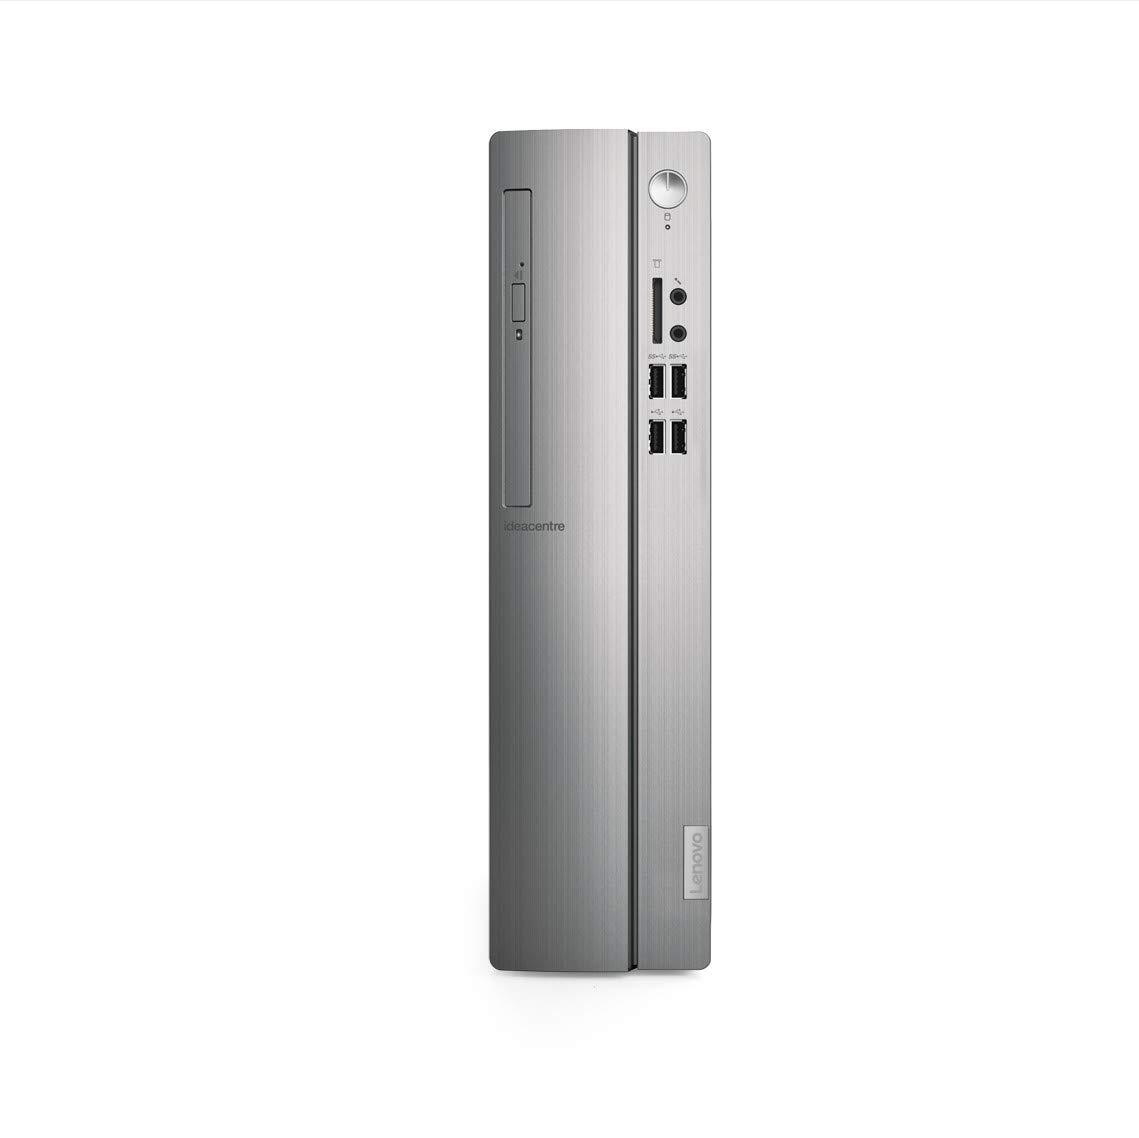 Lenovo Desktop IC310s 90HX0003RIN, Pantium-J5005 processor, 4GB RAM, 1TB HDD with DVD and DOS Operating system and 21.5 inch Monitor-M000000000360 www.mysocially.com